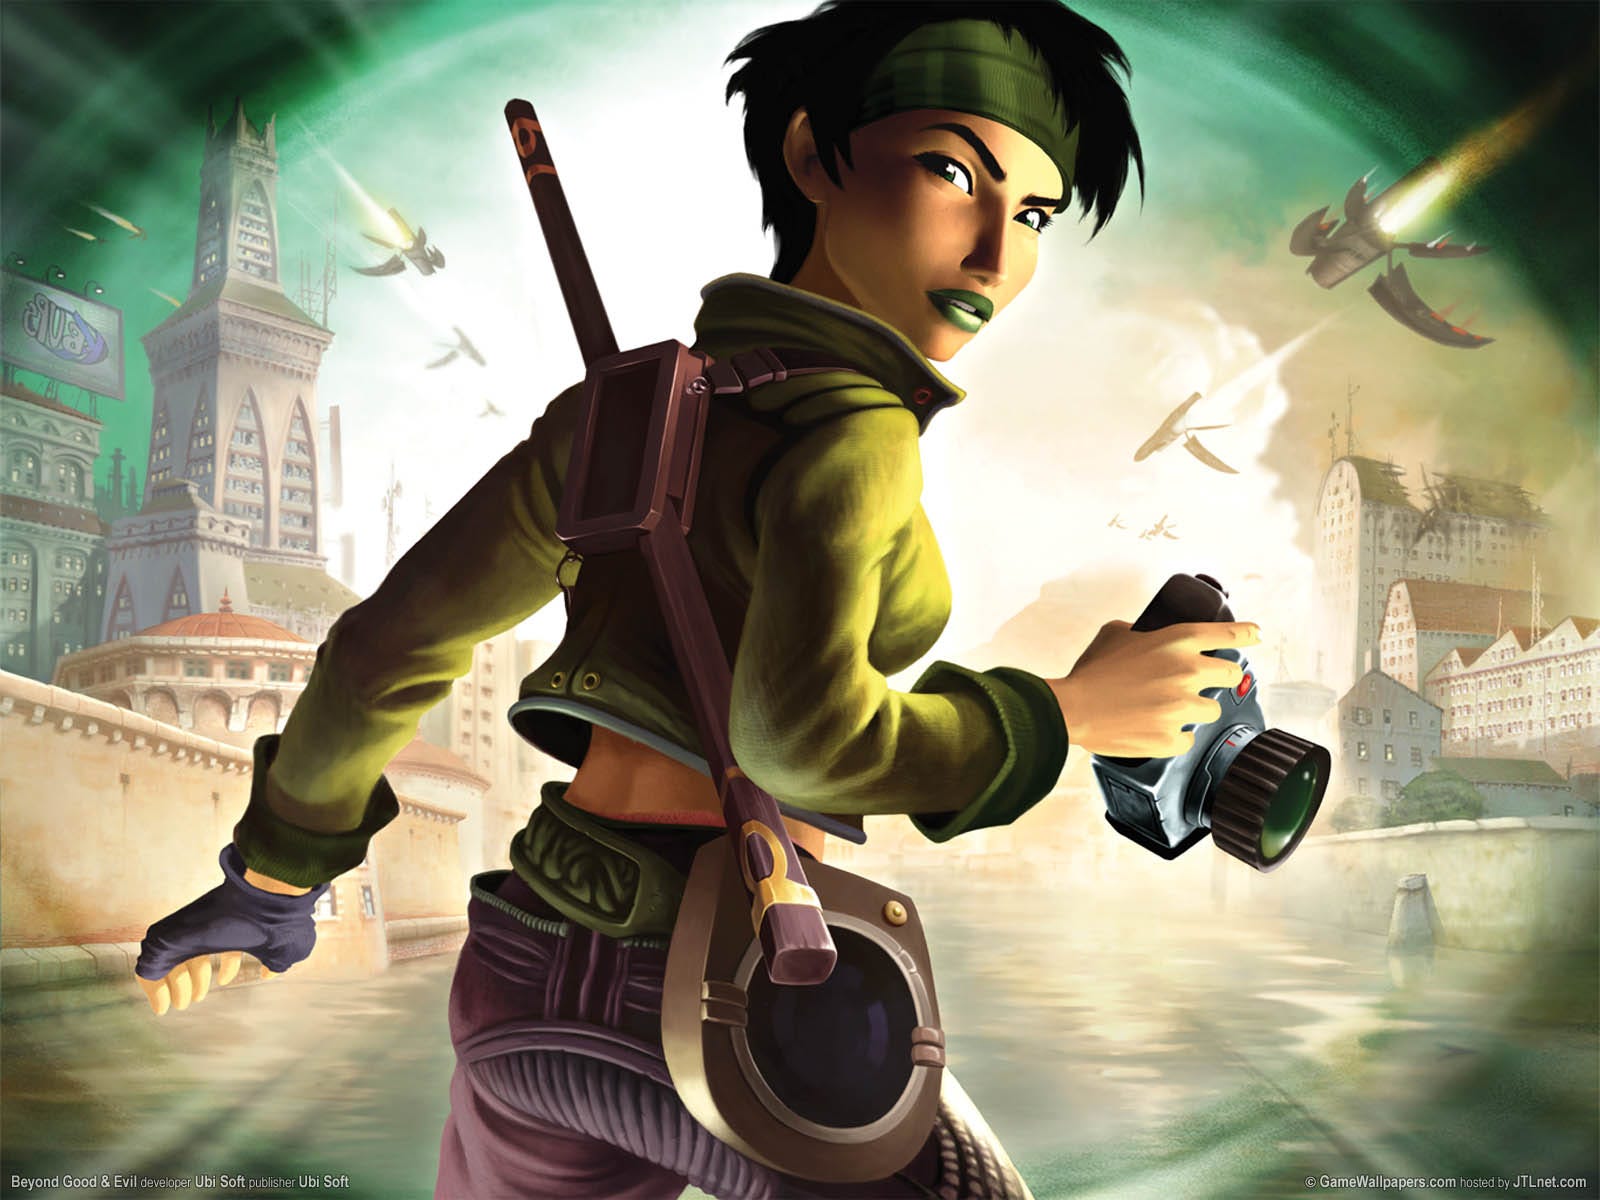 beyond good and evil video game